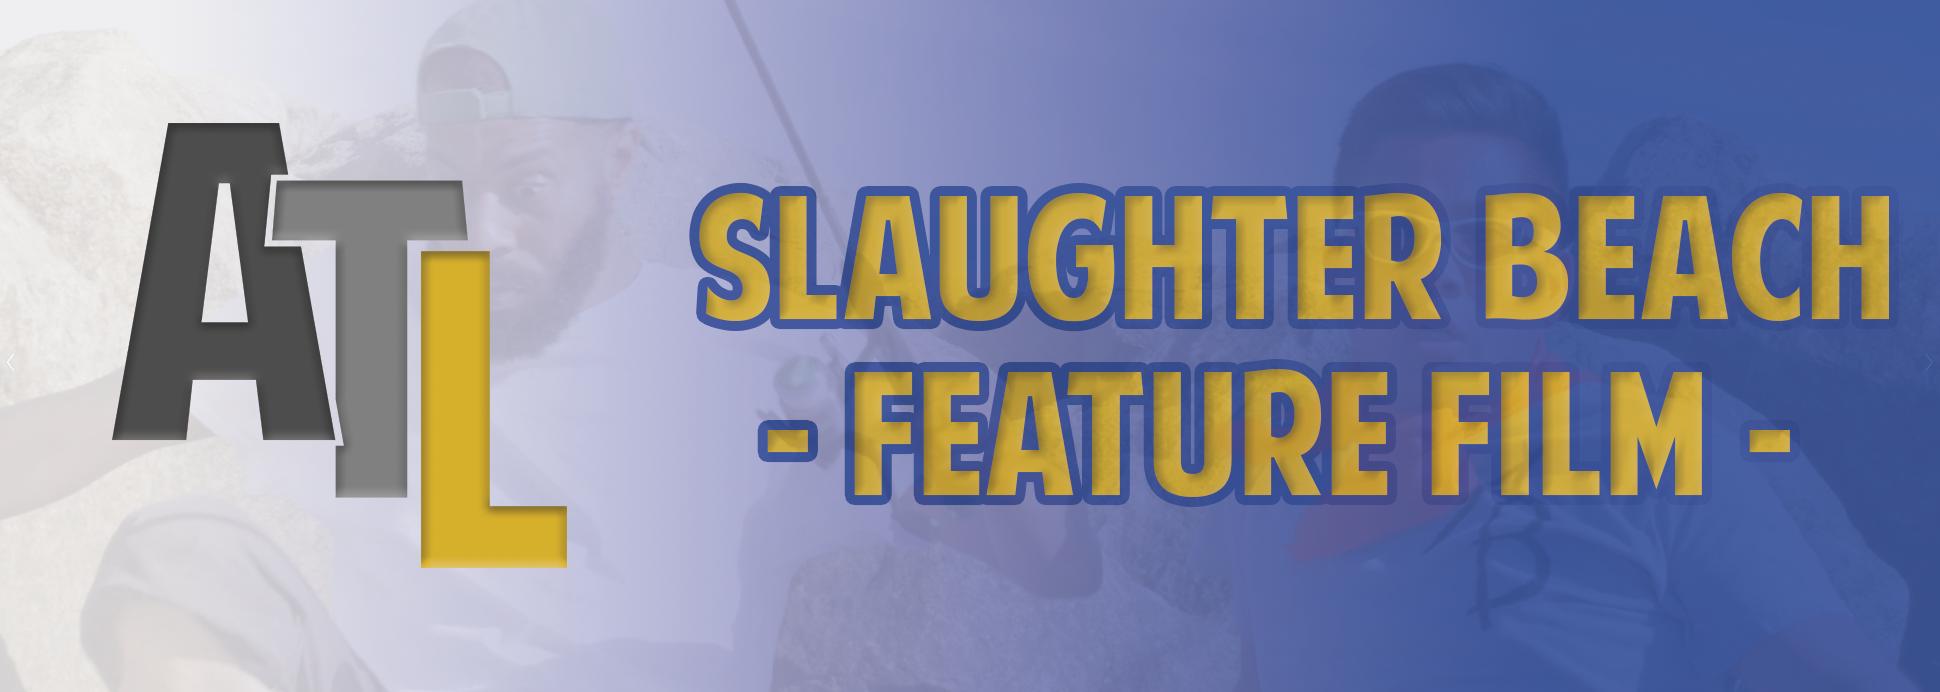 Feature Film - Slaughter Beach